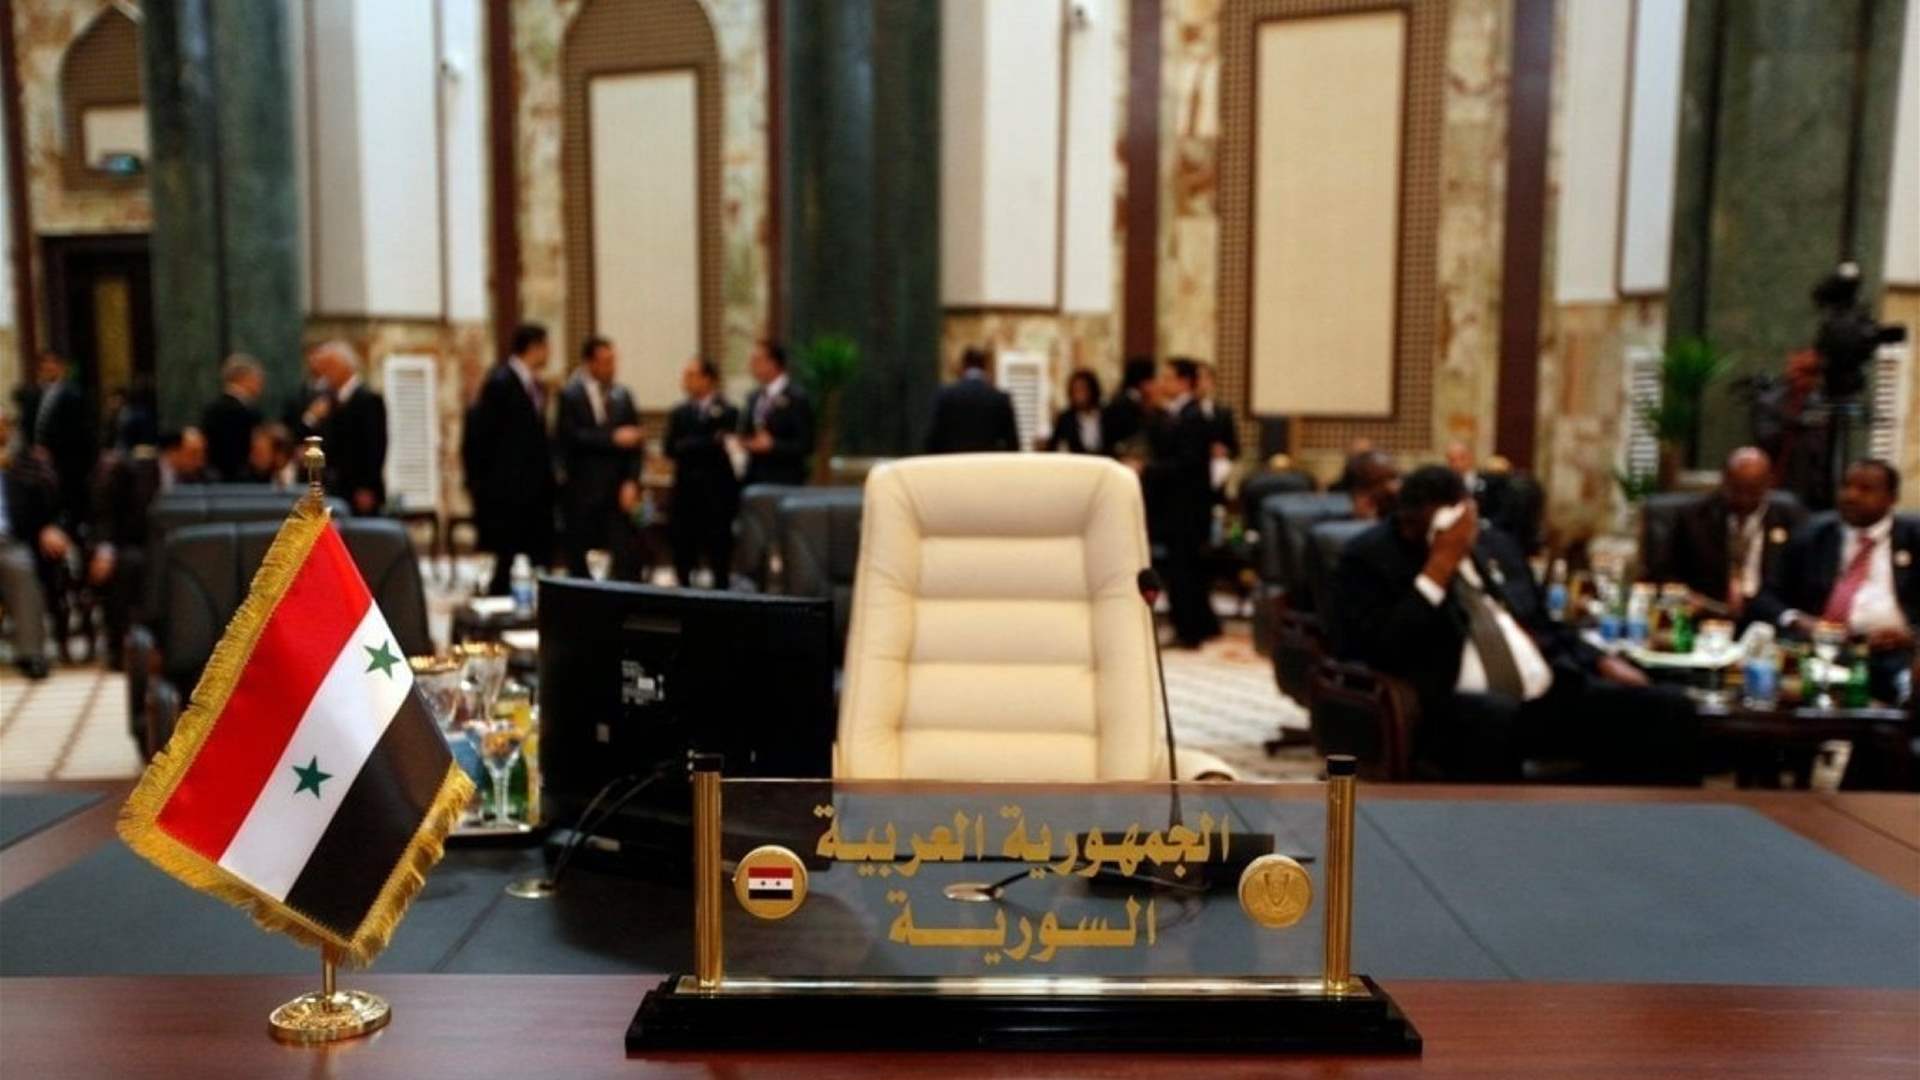 Syria&#39;s potential return to the Arab League: Opposing views and controversies